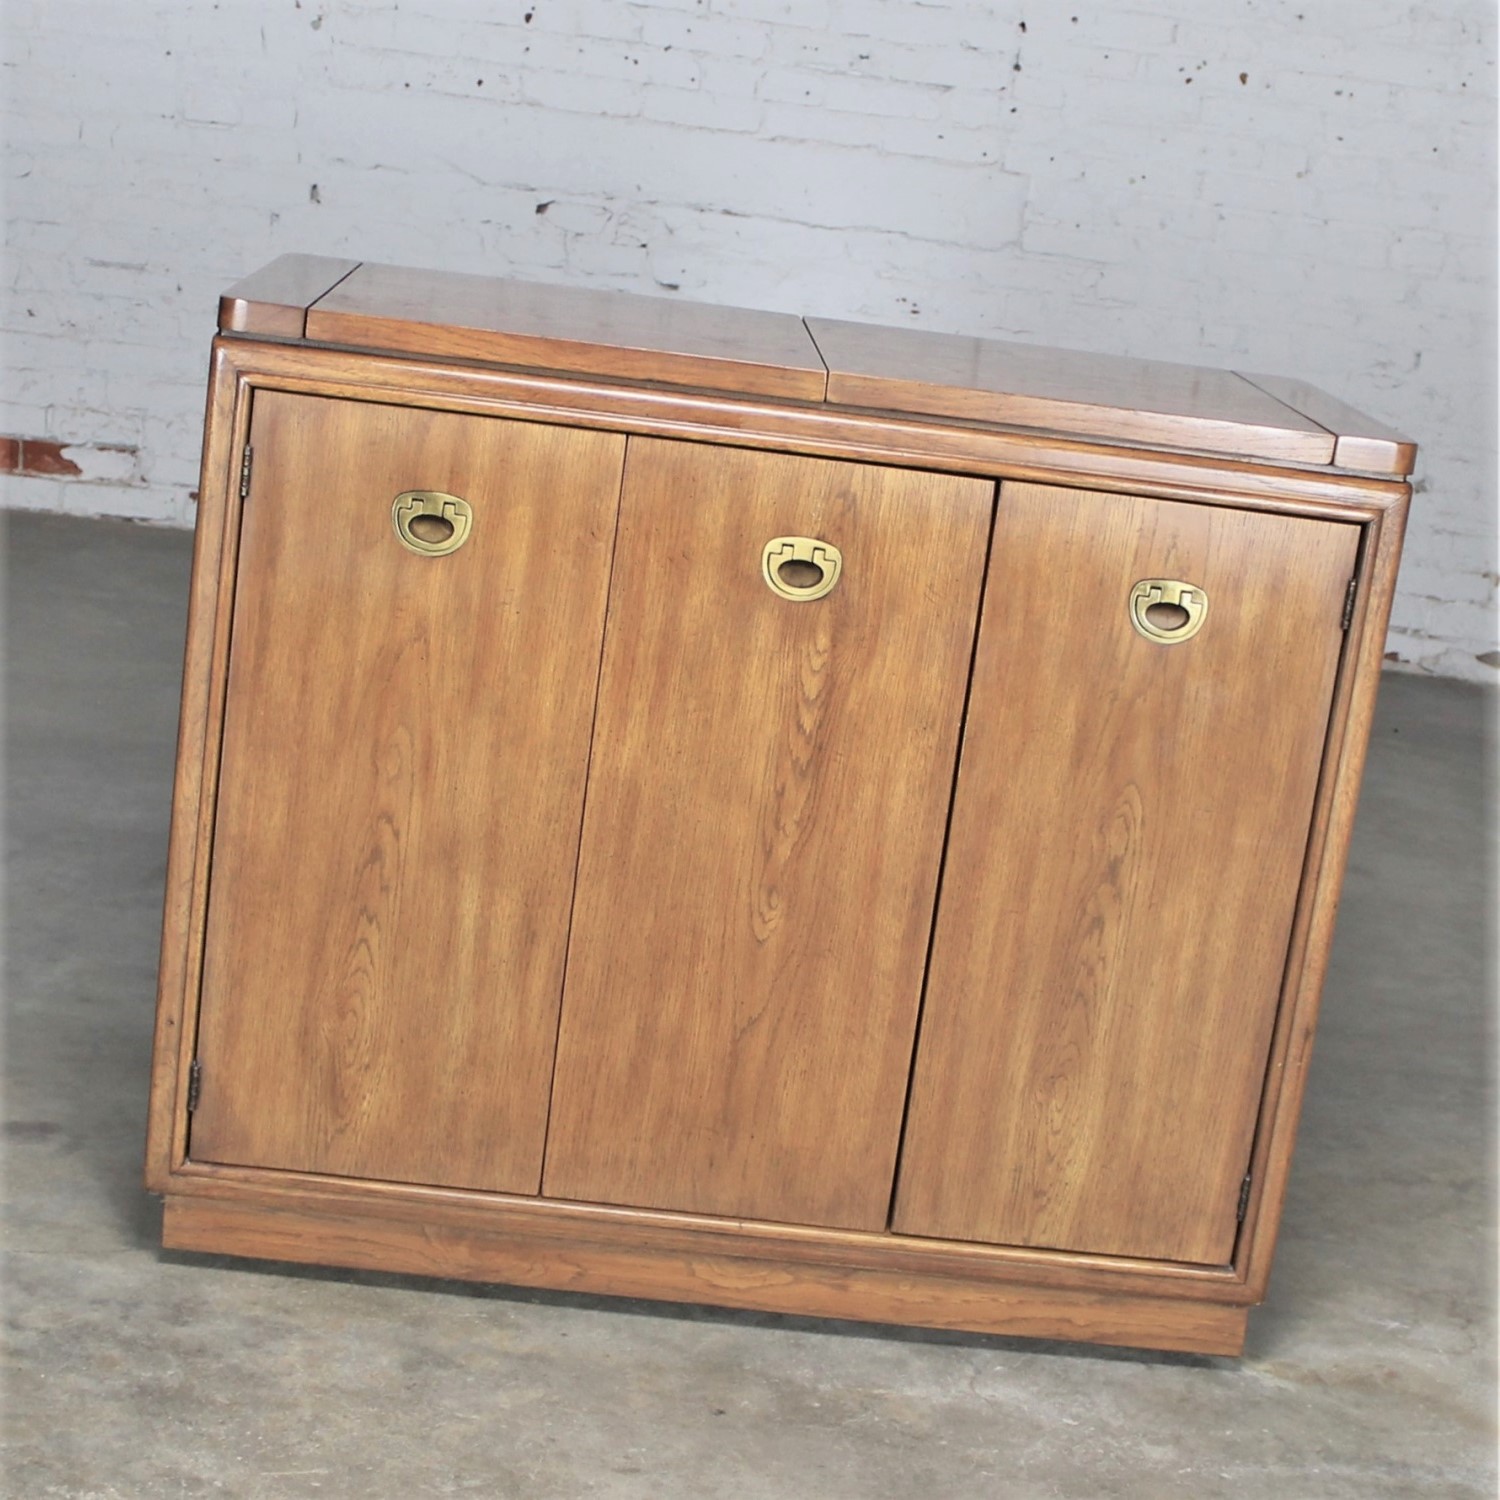 Vintage Mid-Century Campaign Style Rolling Dry Bar by Drexel Heritage